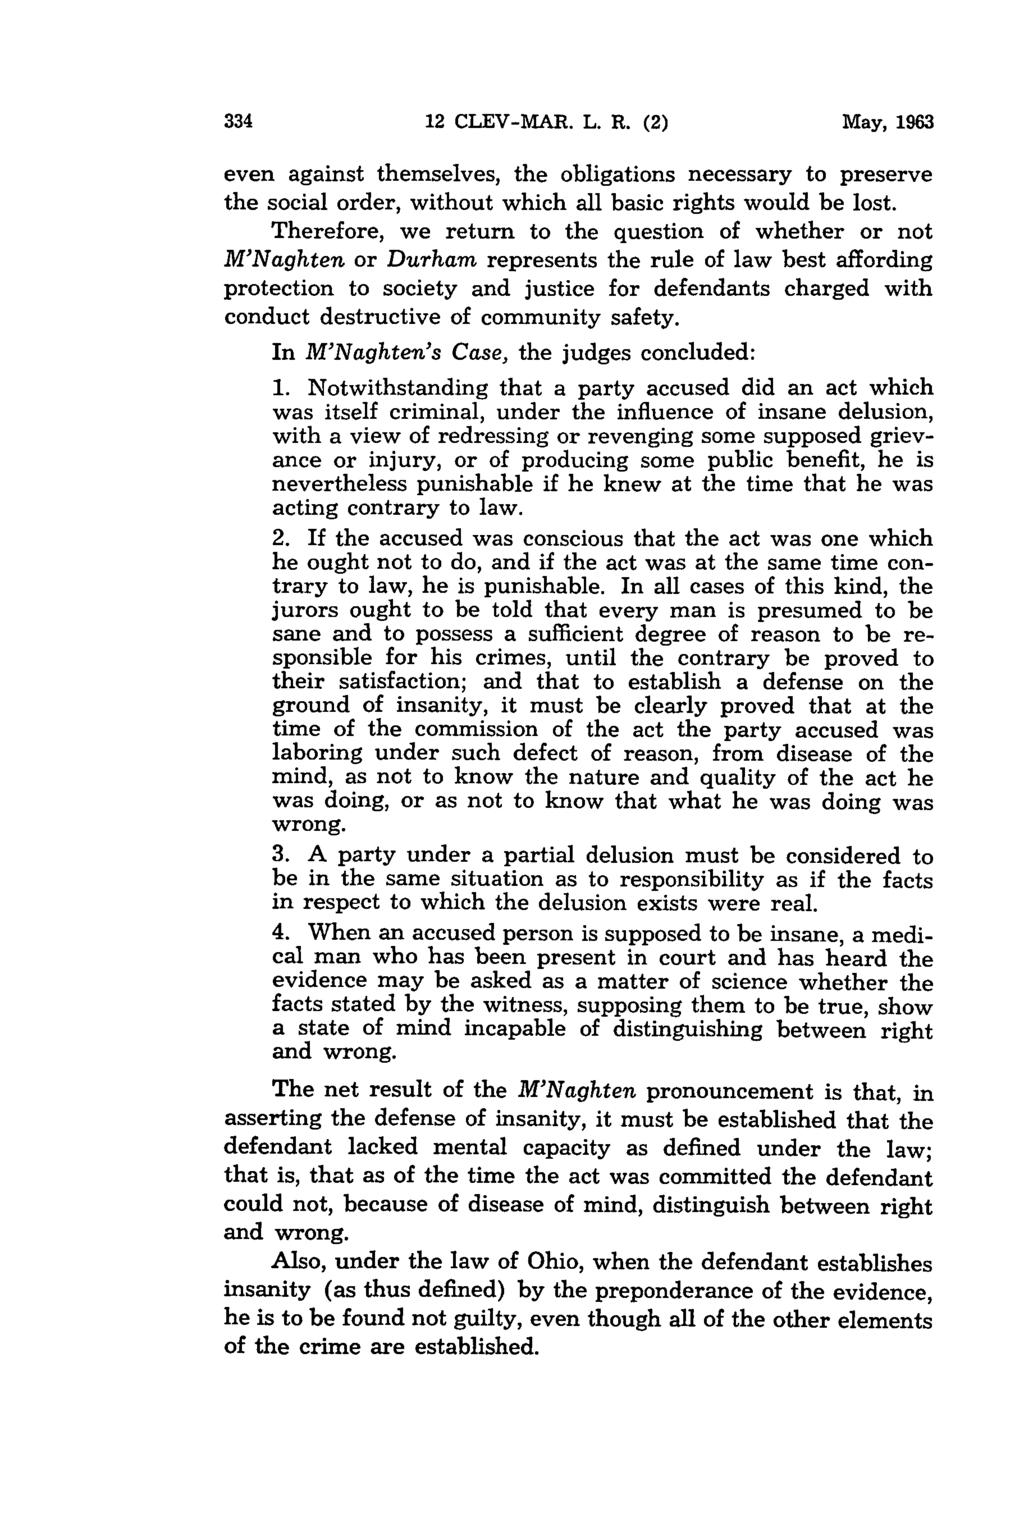 12 CLEV-MAR. L. R. (2) May, 1963 even against themselves, the obligations necessary to preserve the social order, without which all basic rights would be lost.